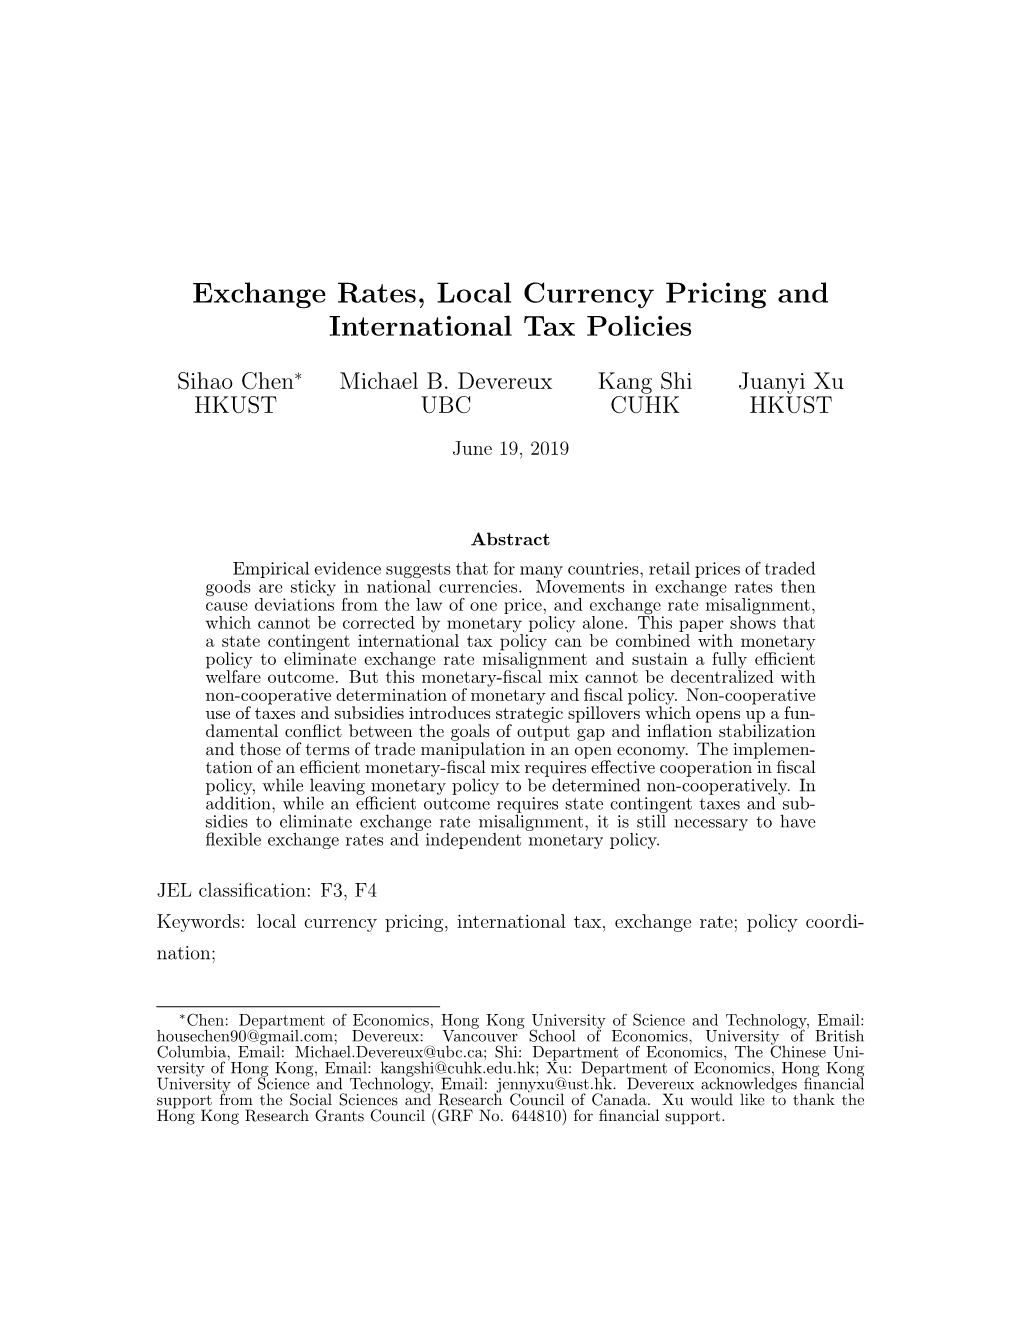 Exchange Rates, Local Currency Pricing and International Tax Policies